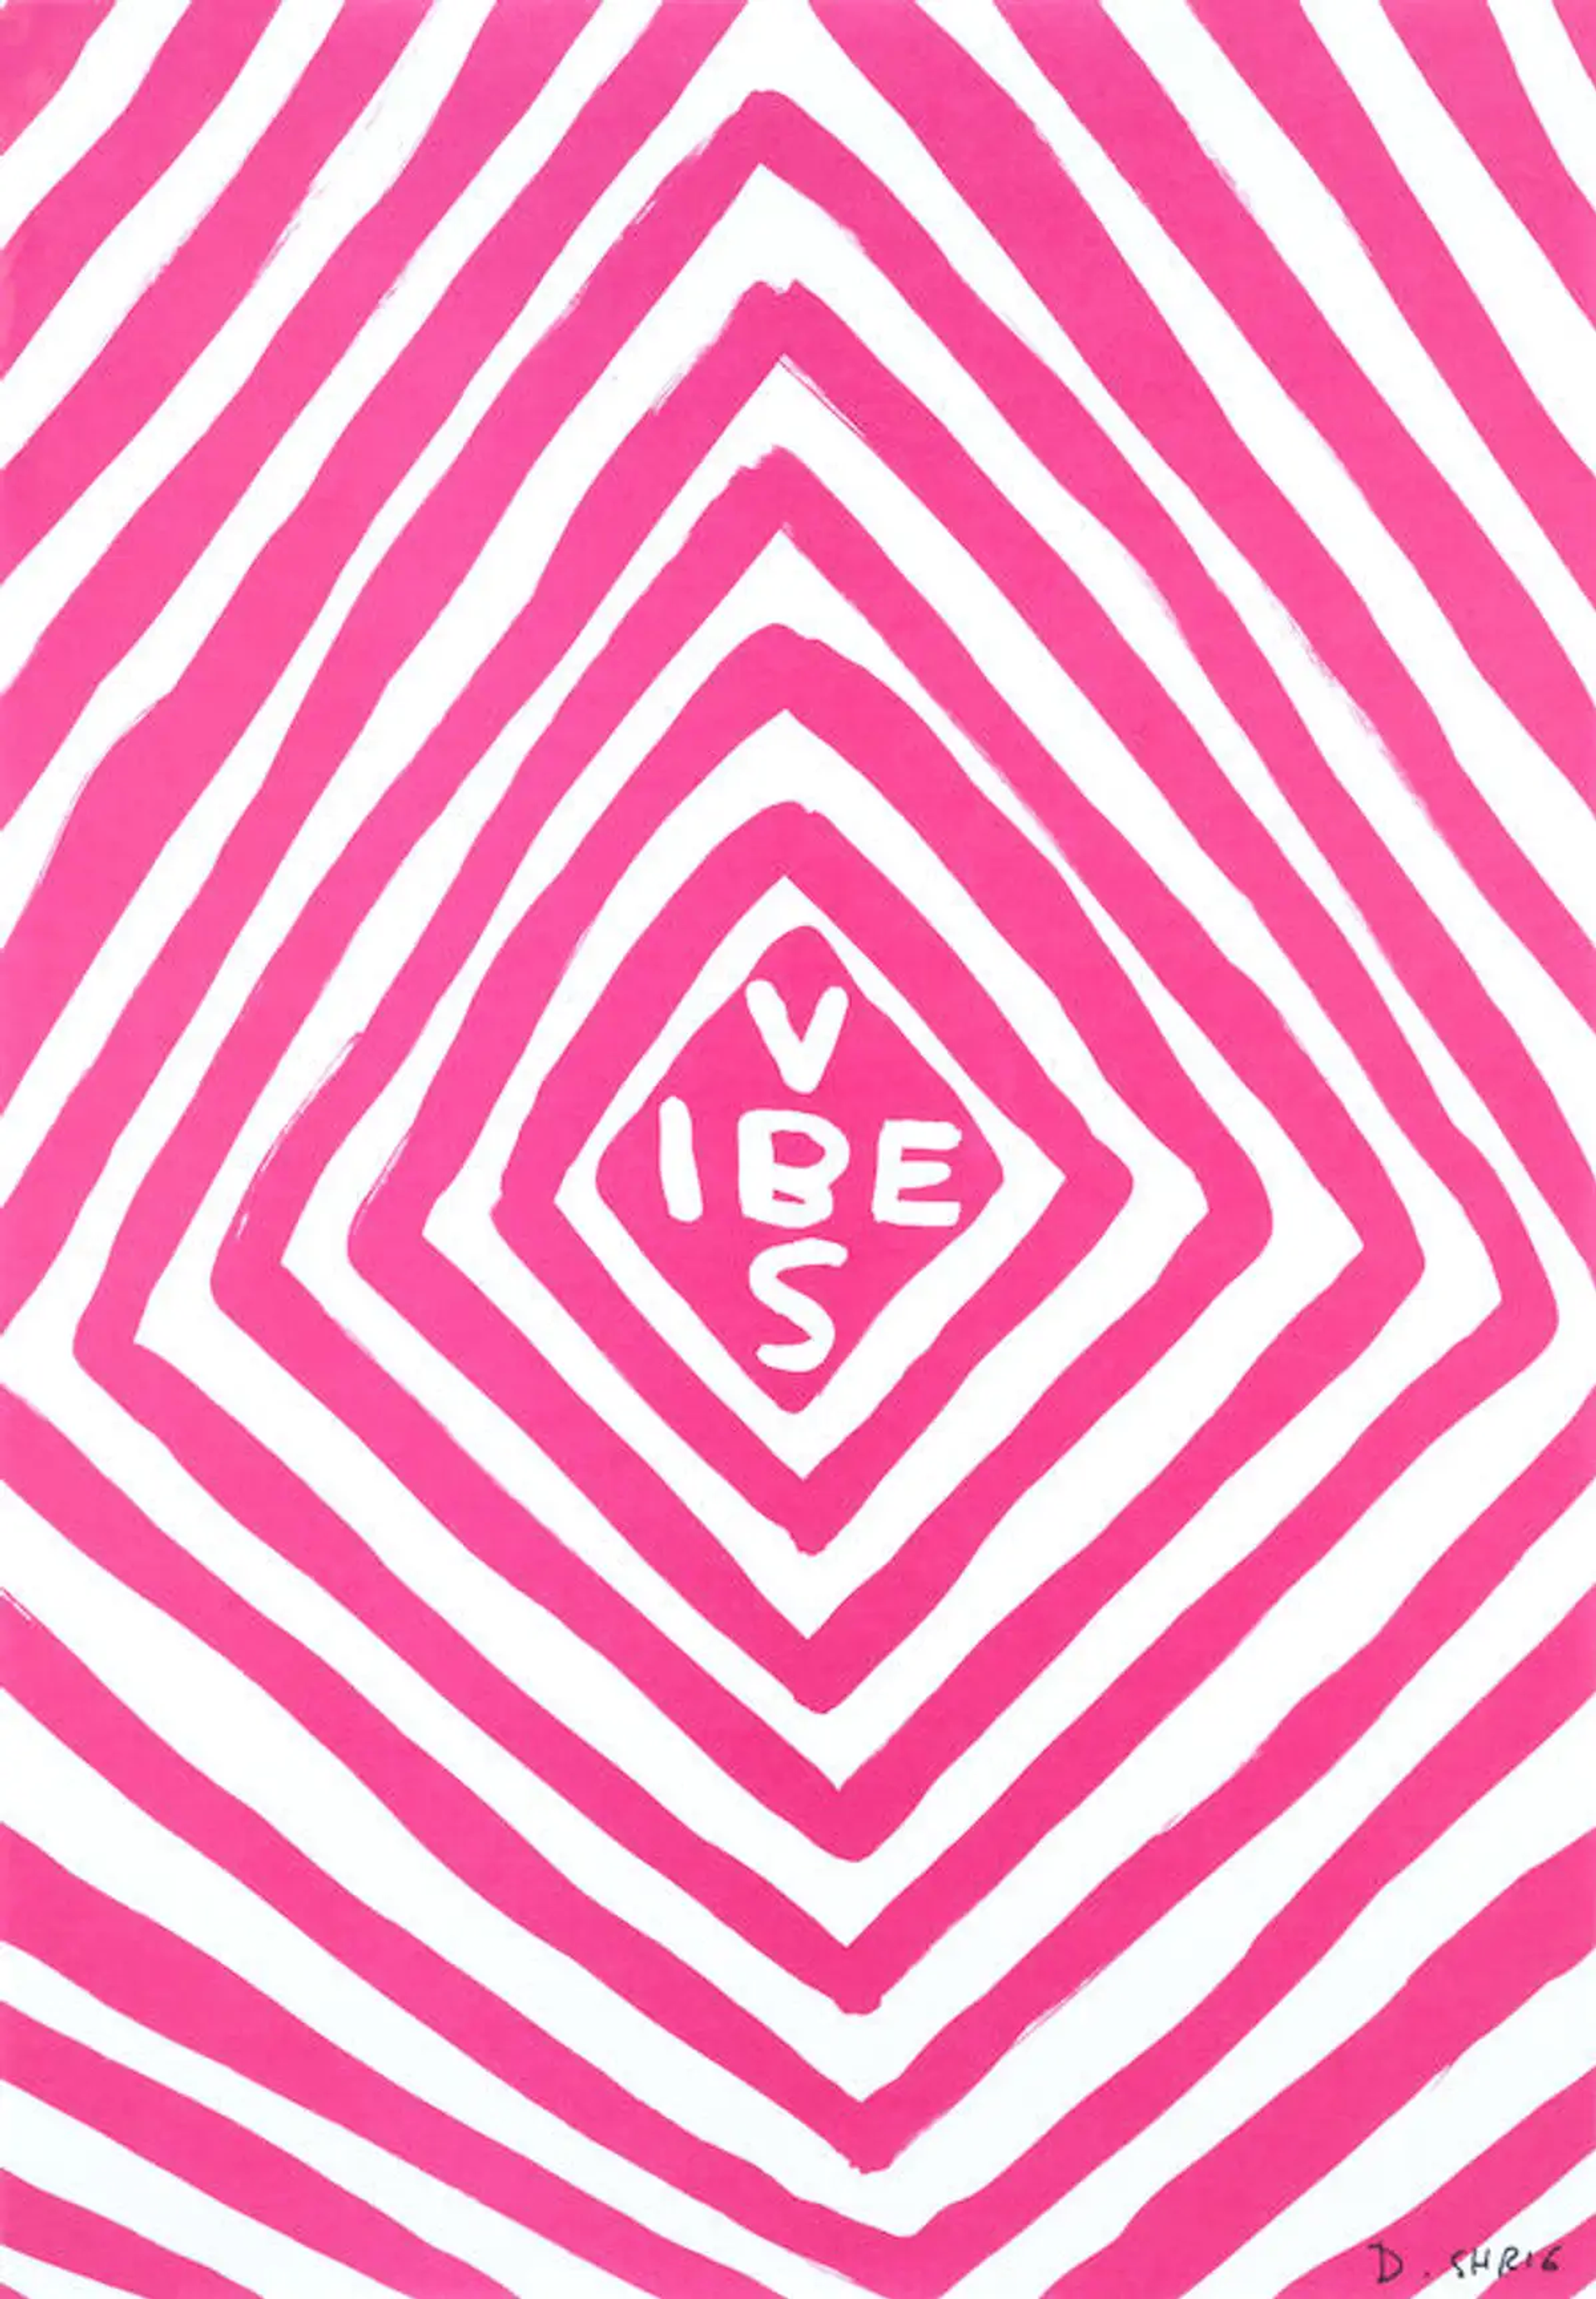 This work shows a series of lozenge-shaped pink lines, surrounding the word "vibes", tightly squeezed in the centre.